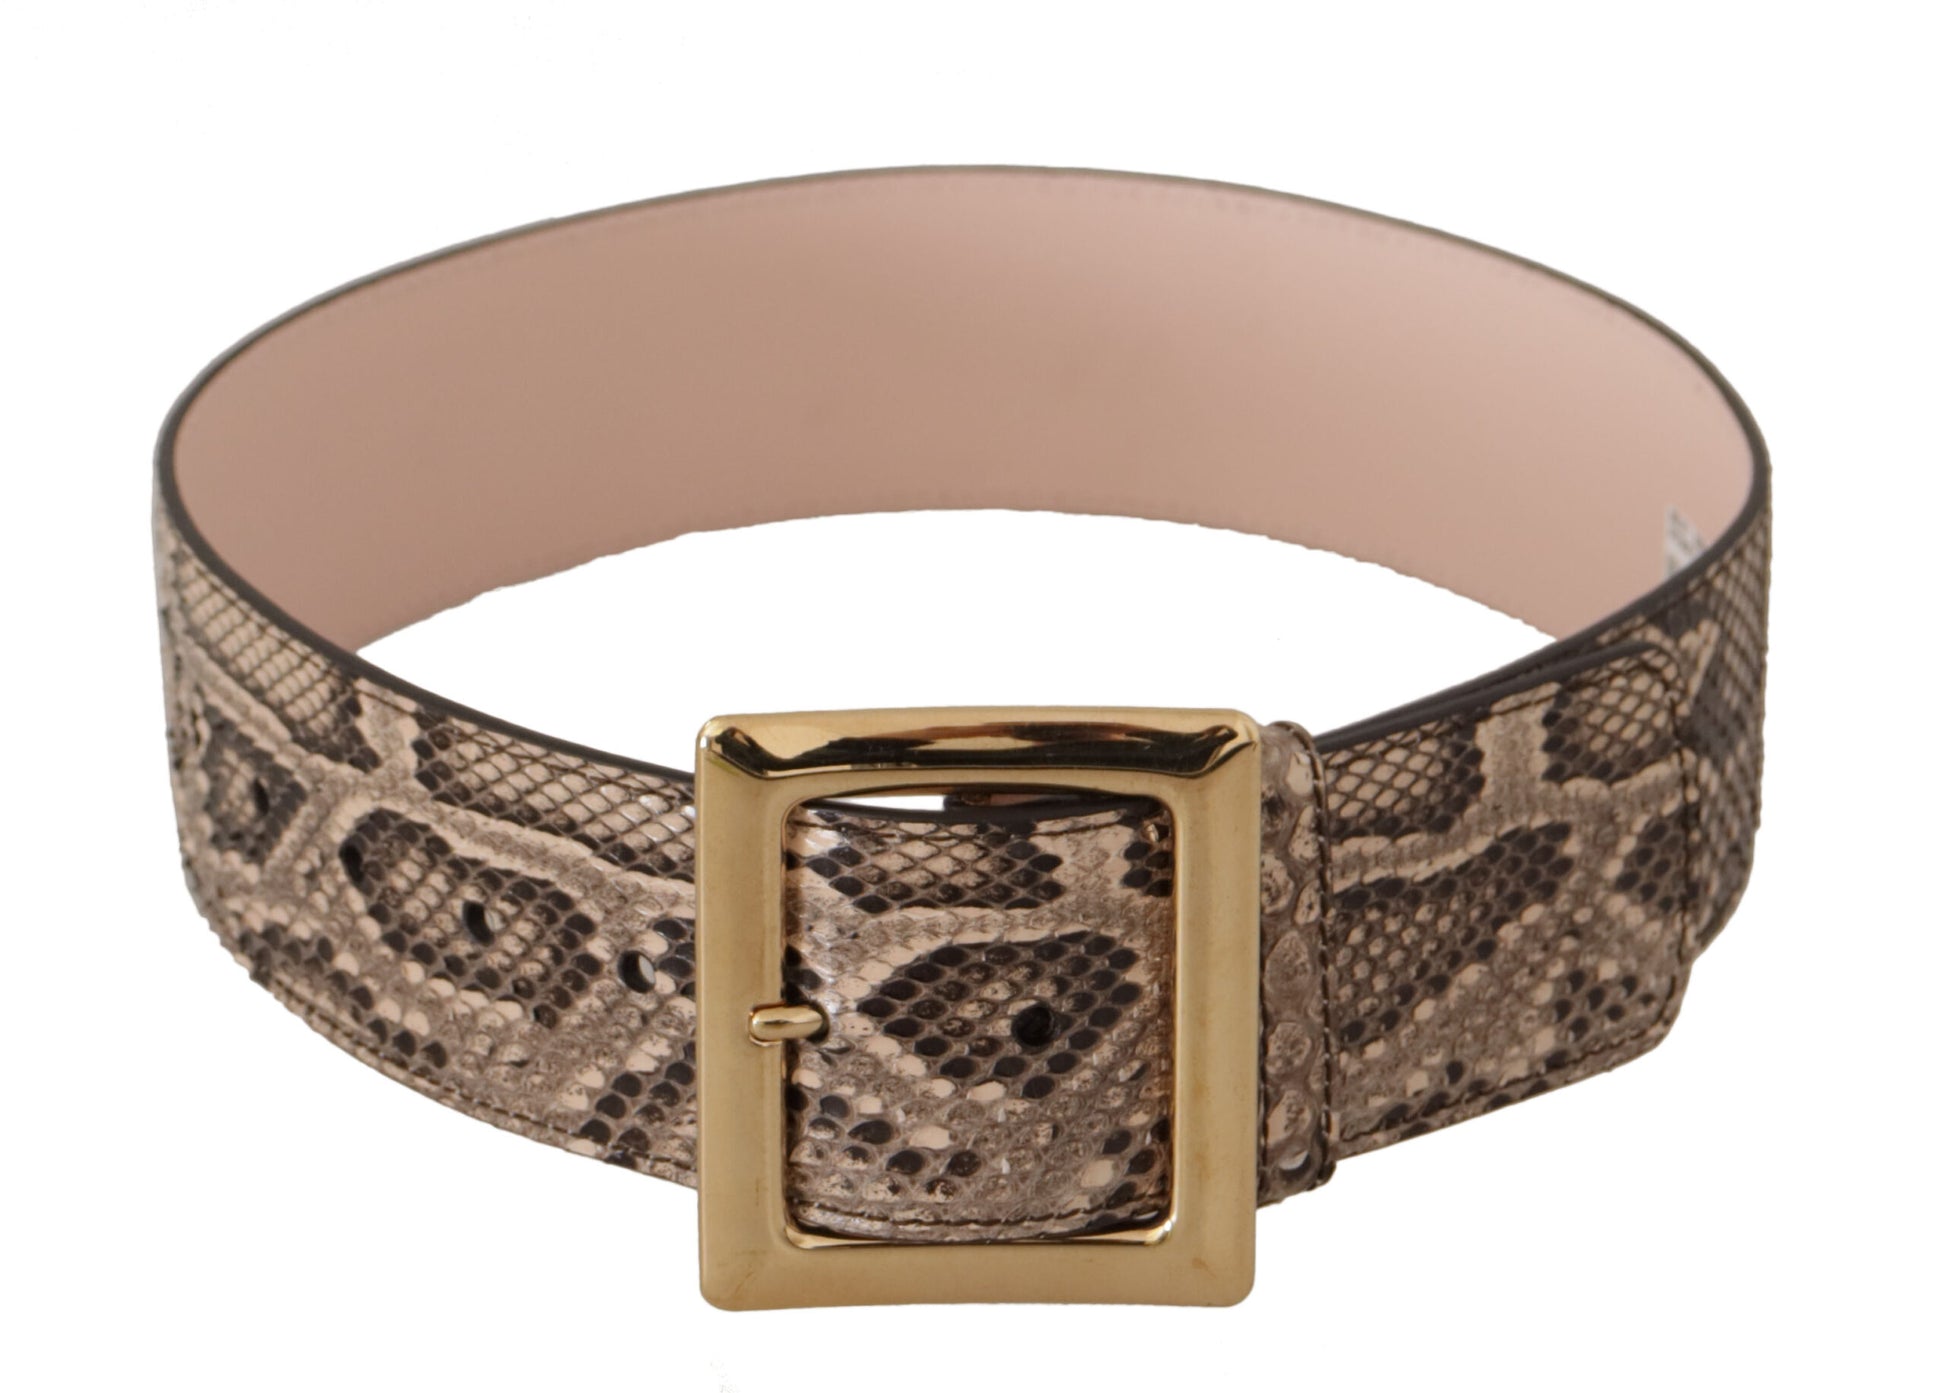 Beige Exotic Leather Wide Gold Metal Buckle Belt - Designed by Dolce & Gabbana Available to Buy at a Discounted Price on Moon Behind The Hill Online Designer Discount Store